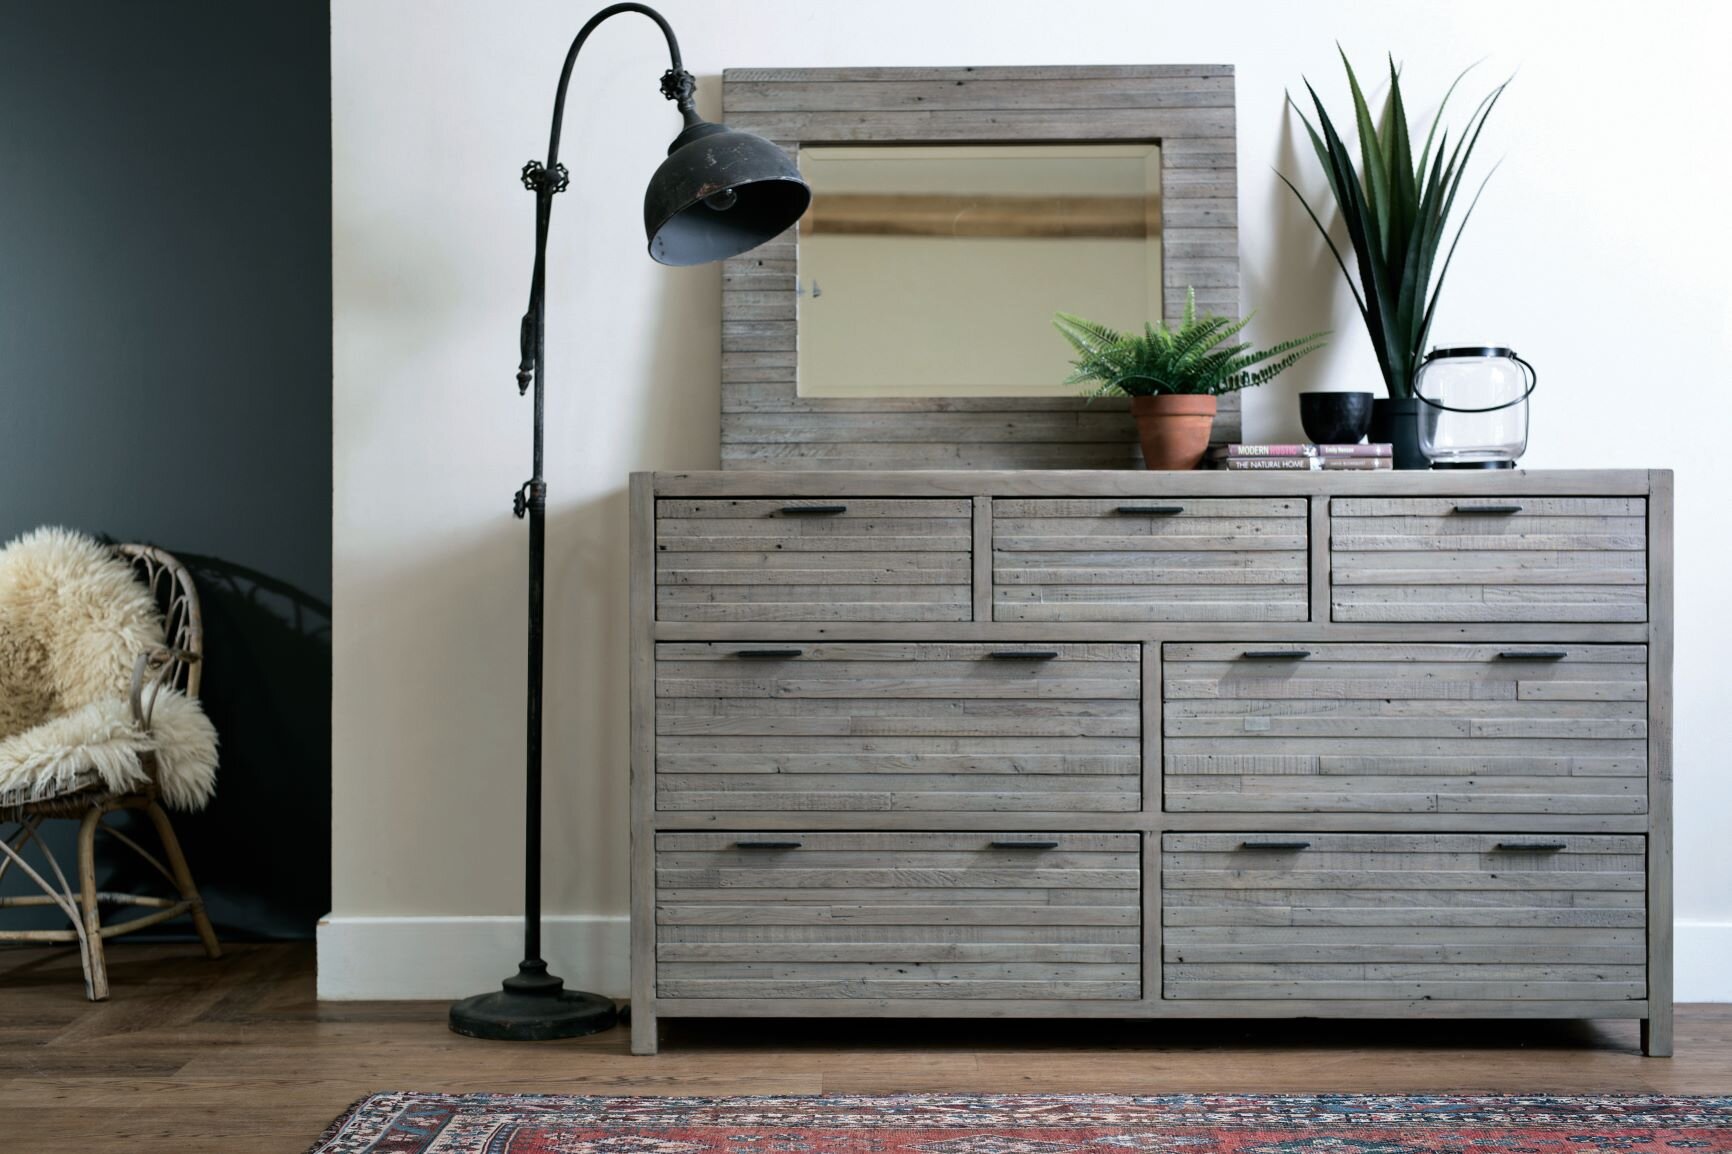 Top 5 Bedroom Storage Ideas The Reclaimed Furniture Company